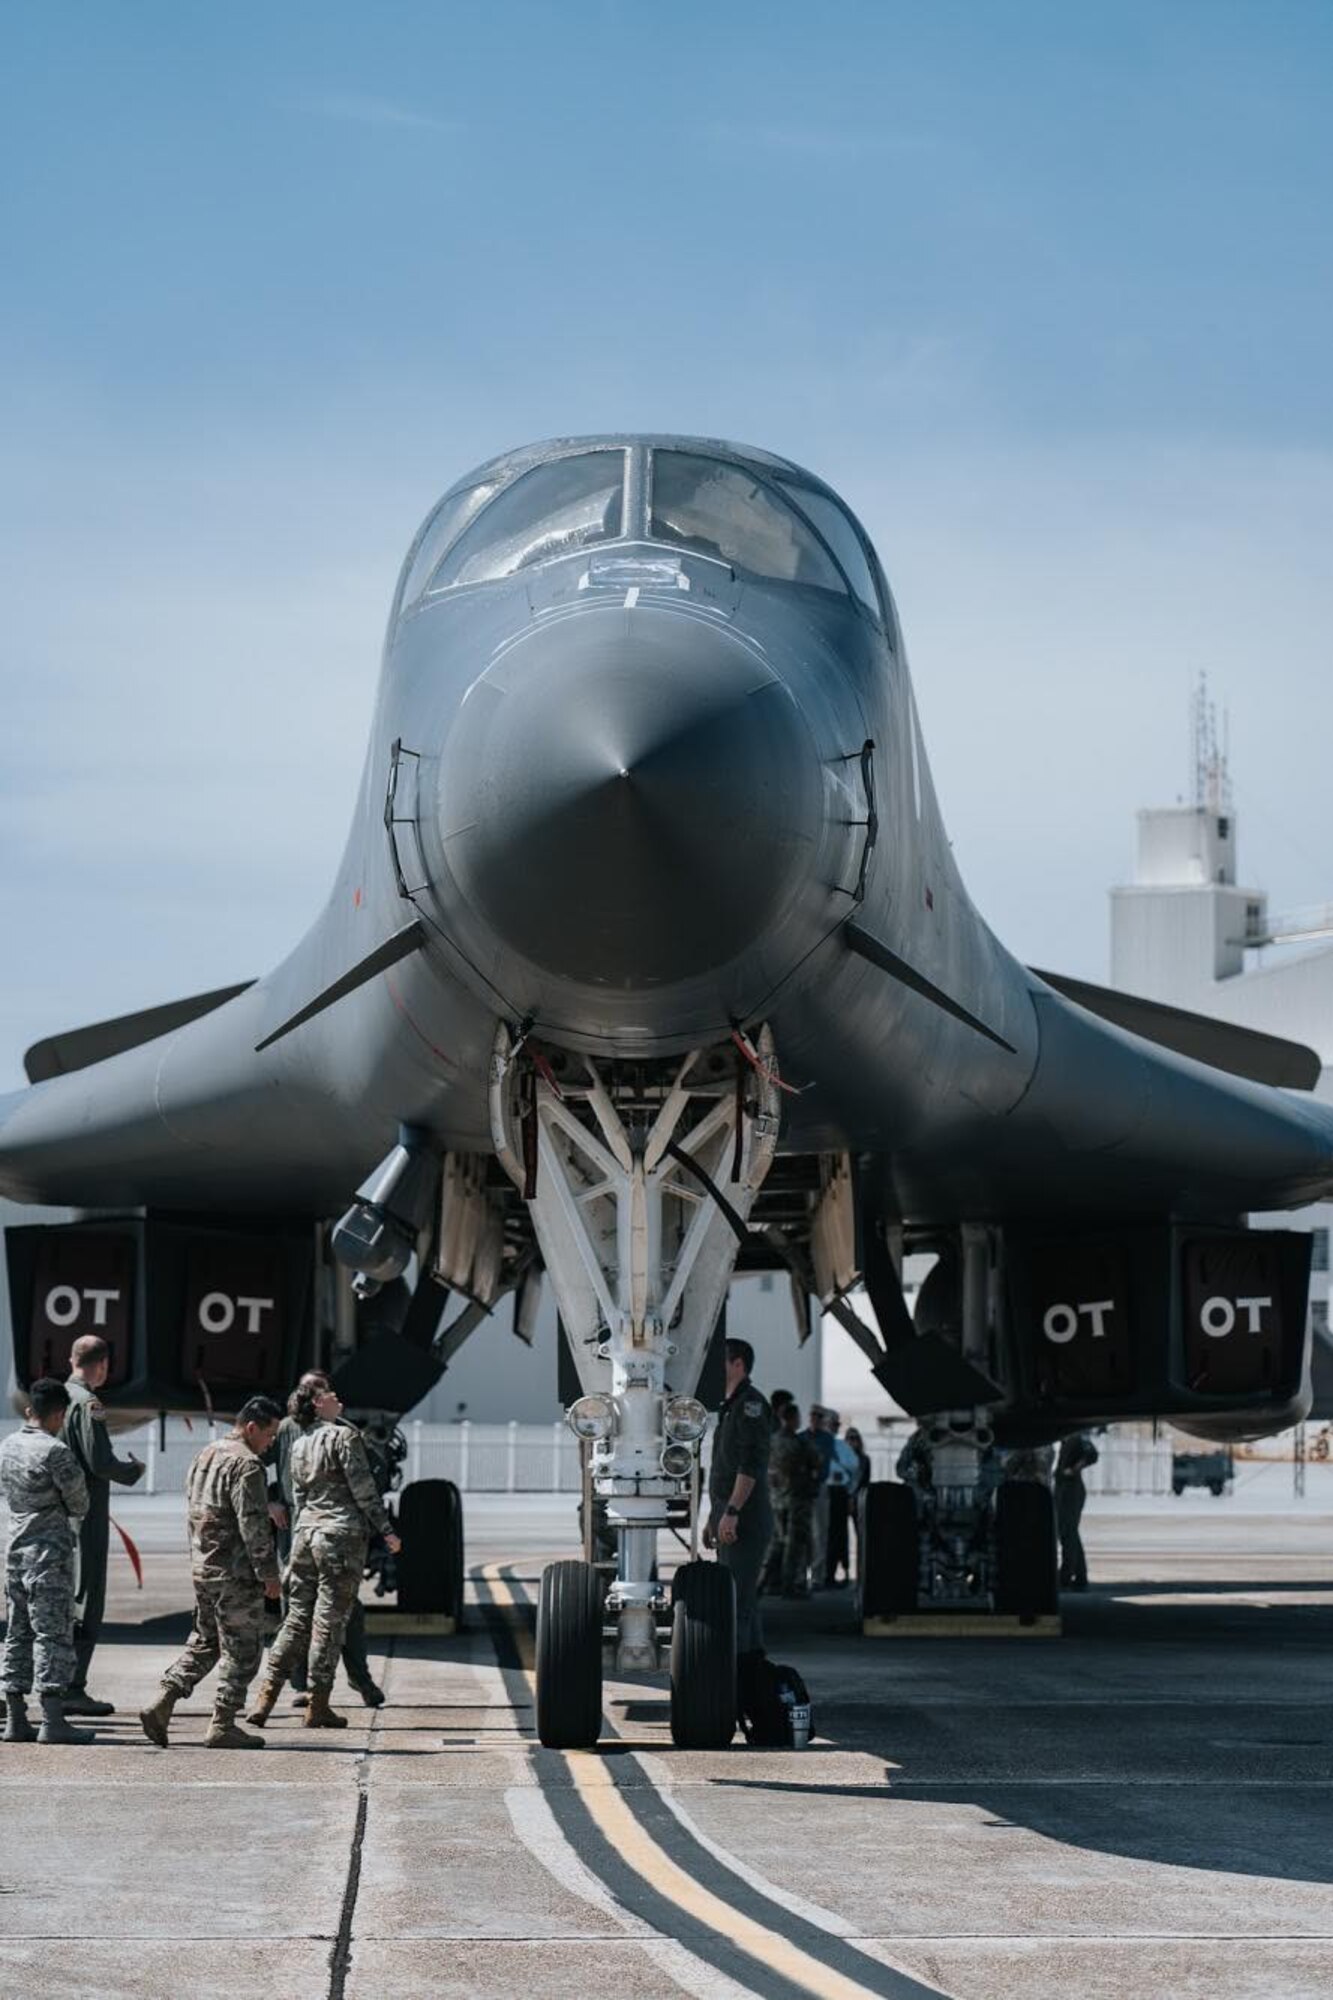 A B1-B Lancer from the 337th Test and Evaluation Squadron at Dyess Air Force Base, Texas sits on the ramp at Eglin Air Force Base, Fla. on July 30, 2016 as 53d Wing Airmen receive a tour of the bomber. Aircrew brought the 53rd Wing bombers to allow wing personnel an opportunity to see one of their geographically separated aircraft up close. (U.S. Army photo/PFC Aaron Shaeper)